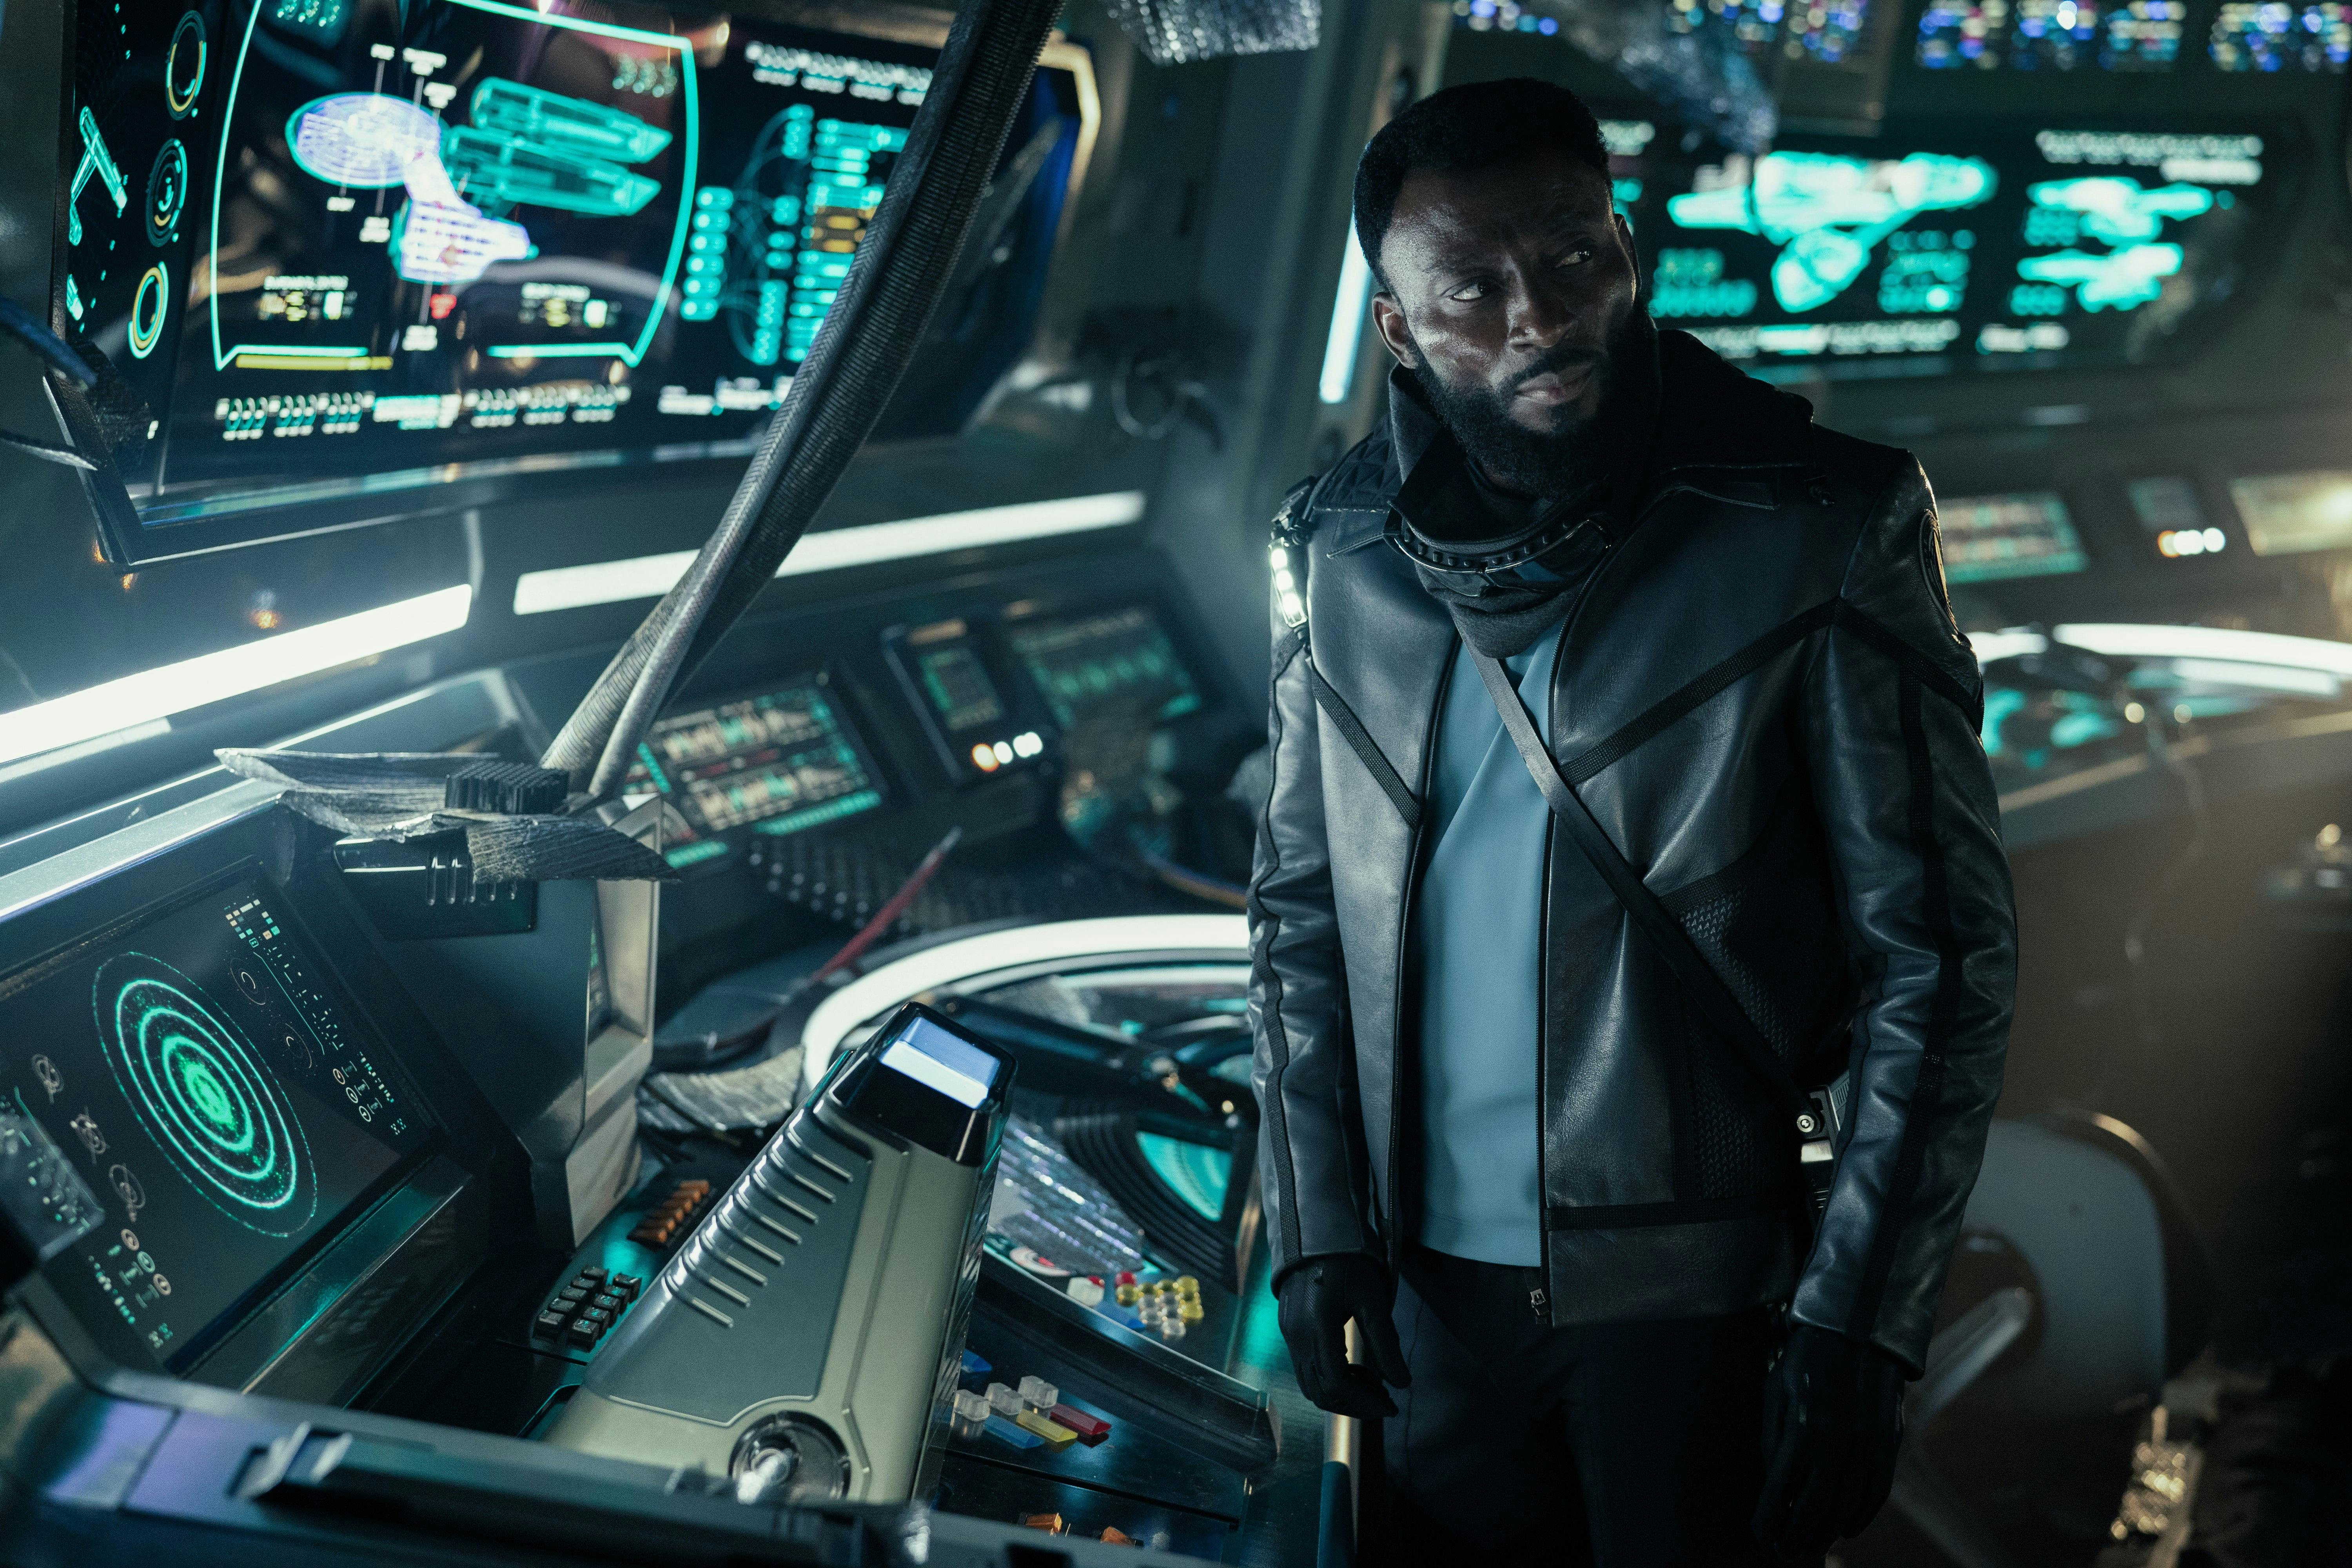 Dr. M'Benga (Babs Olusanmokun) stands near a console on the Enterprise's bridge. He is wearing a jacket over his uniform.